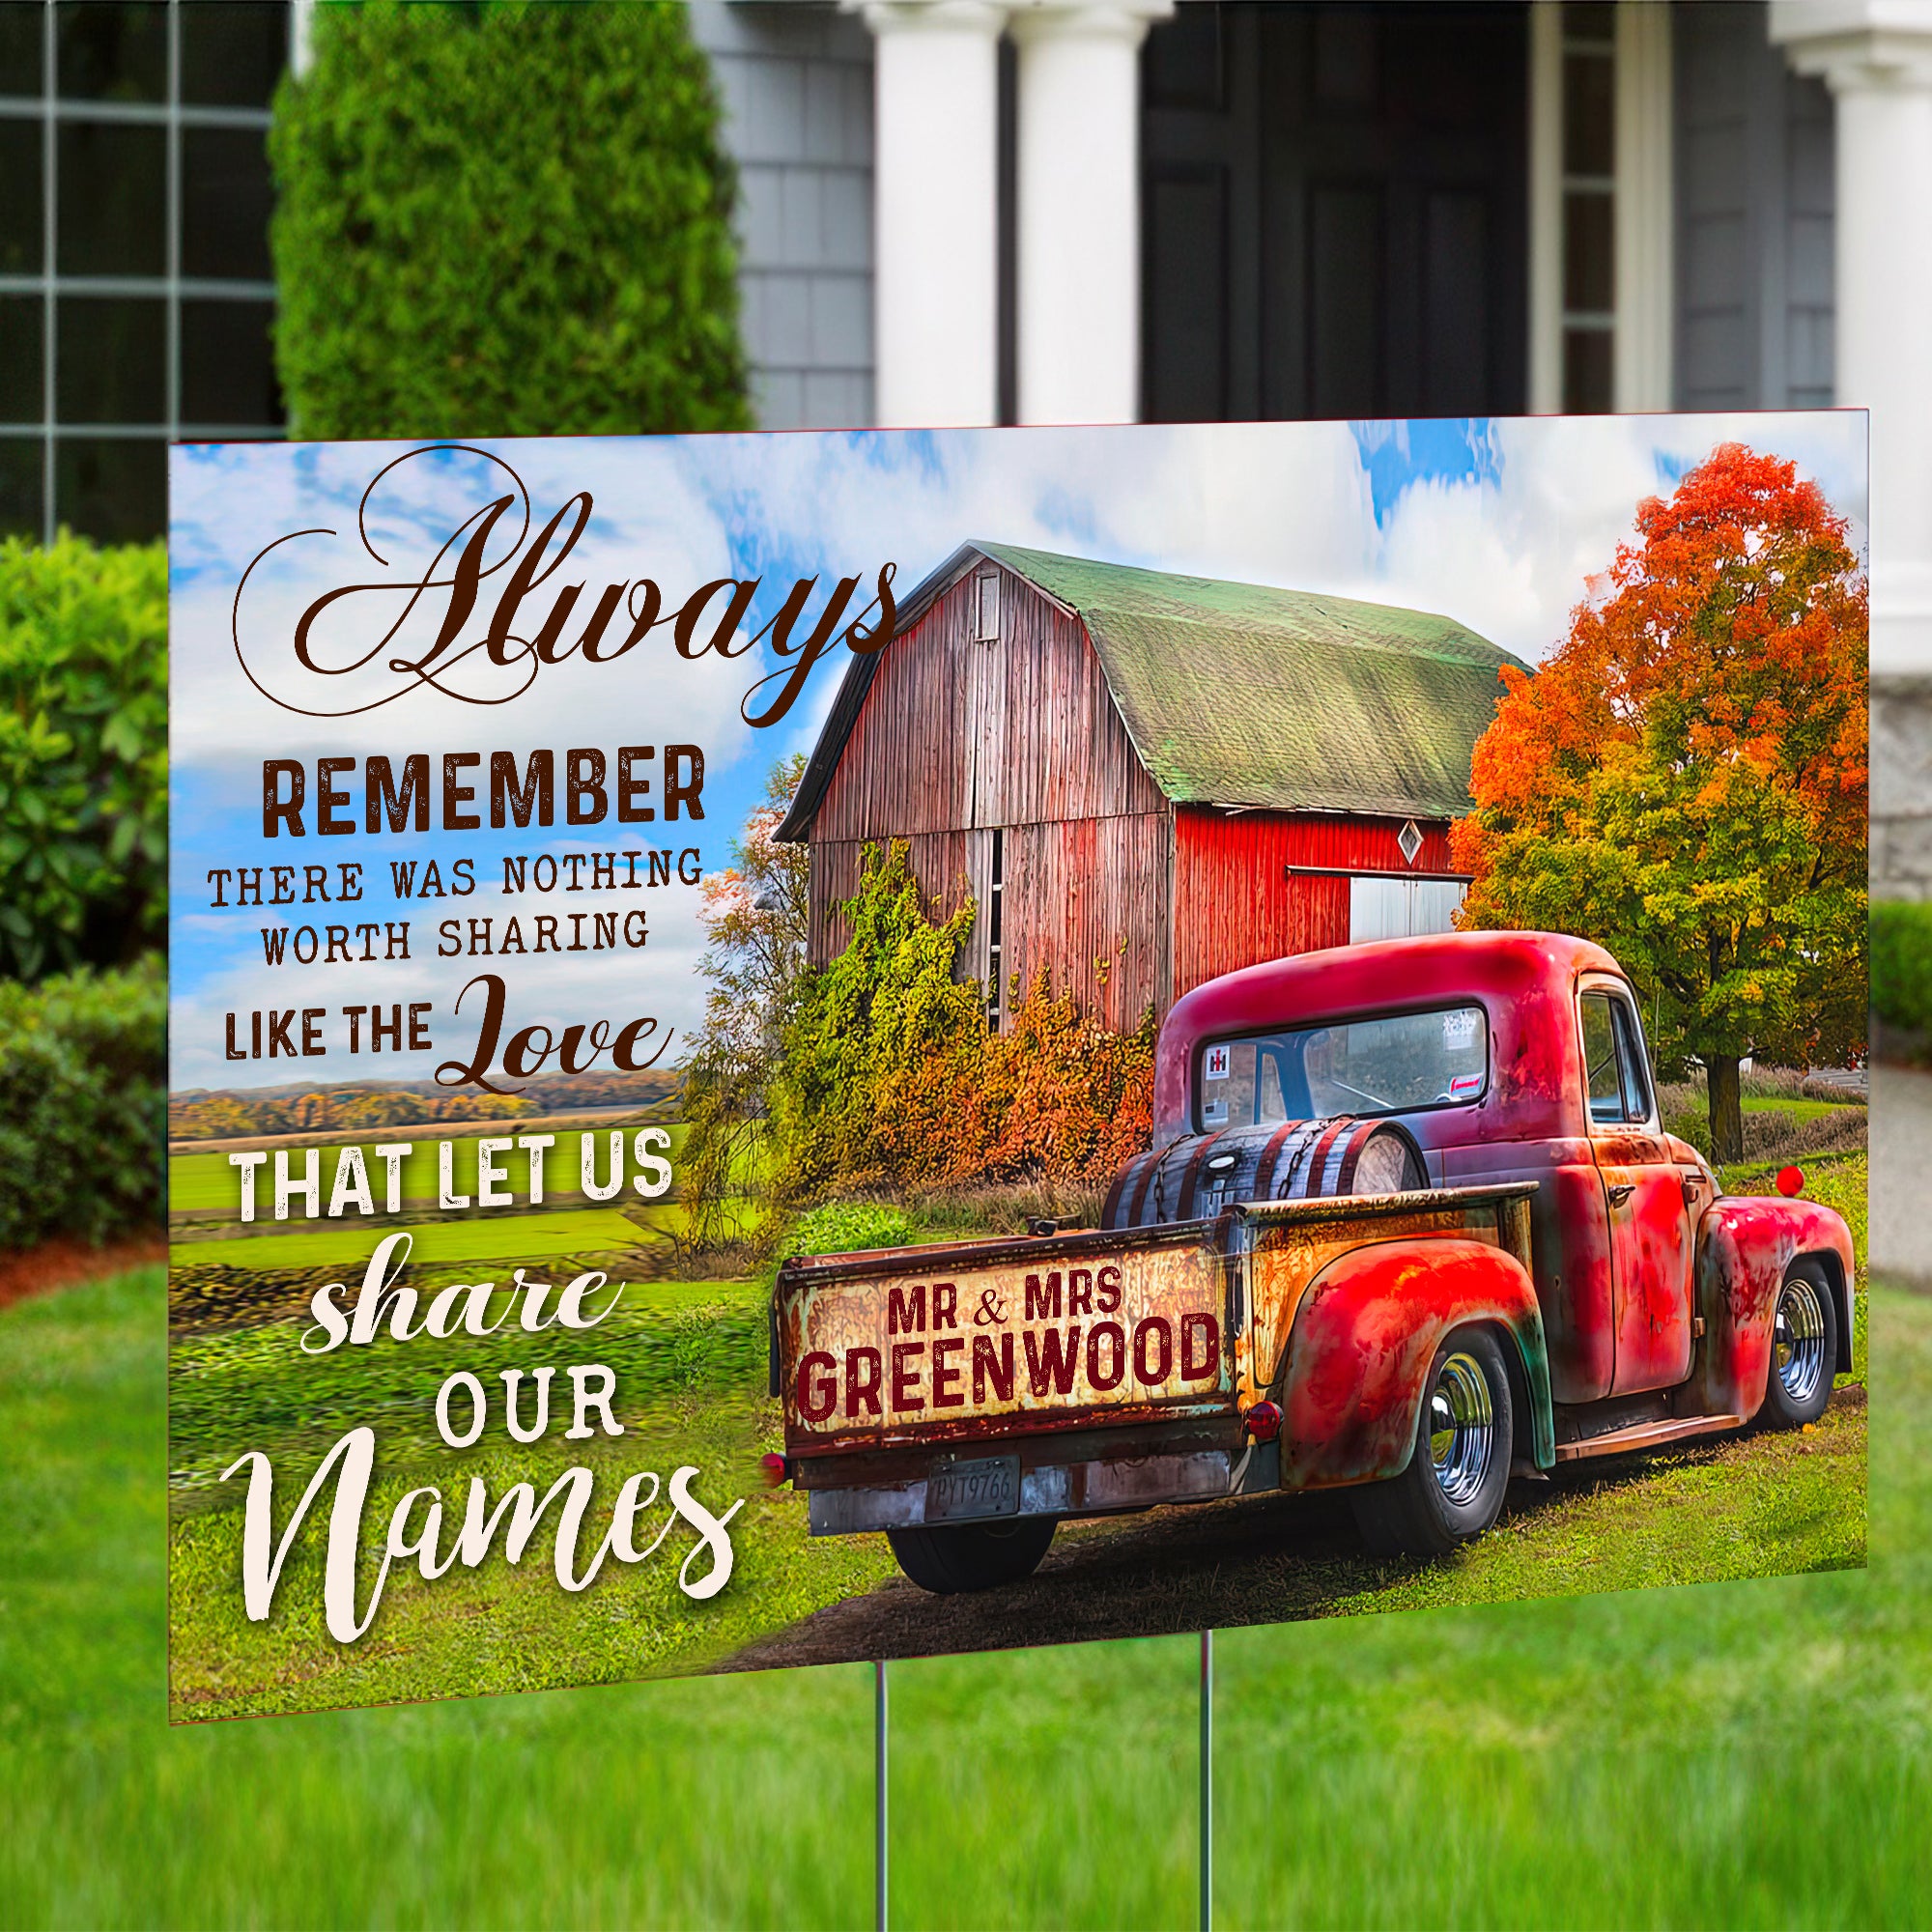 Always Remember There Was Nothing Sharing Like The Love Let Us Share Our Names,Personalized Lawn Sign, Wedding Gift